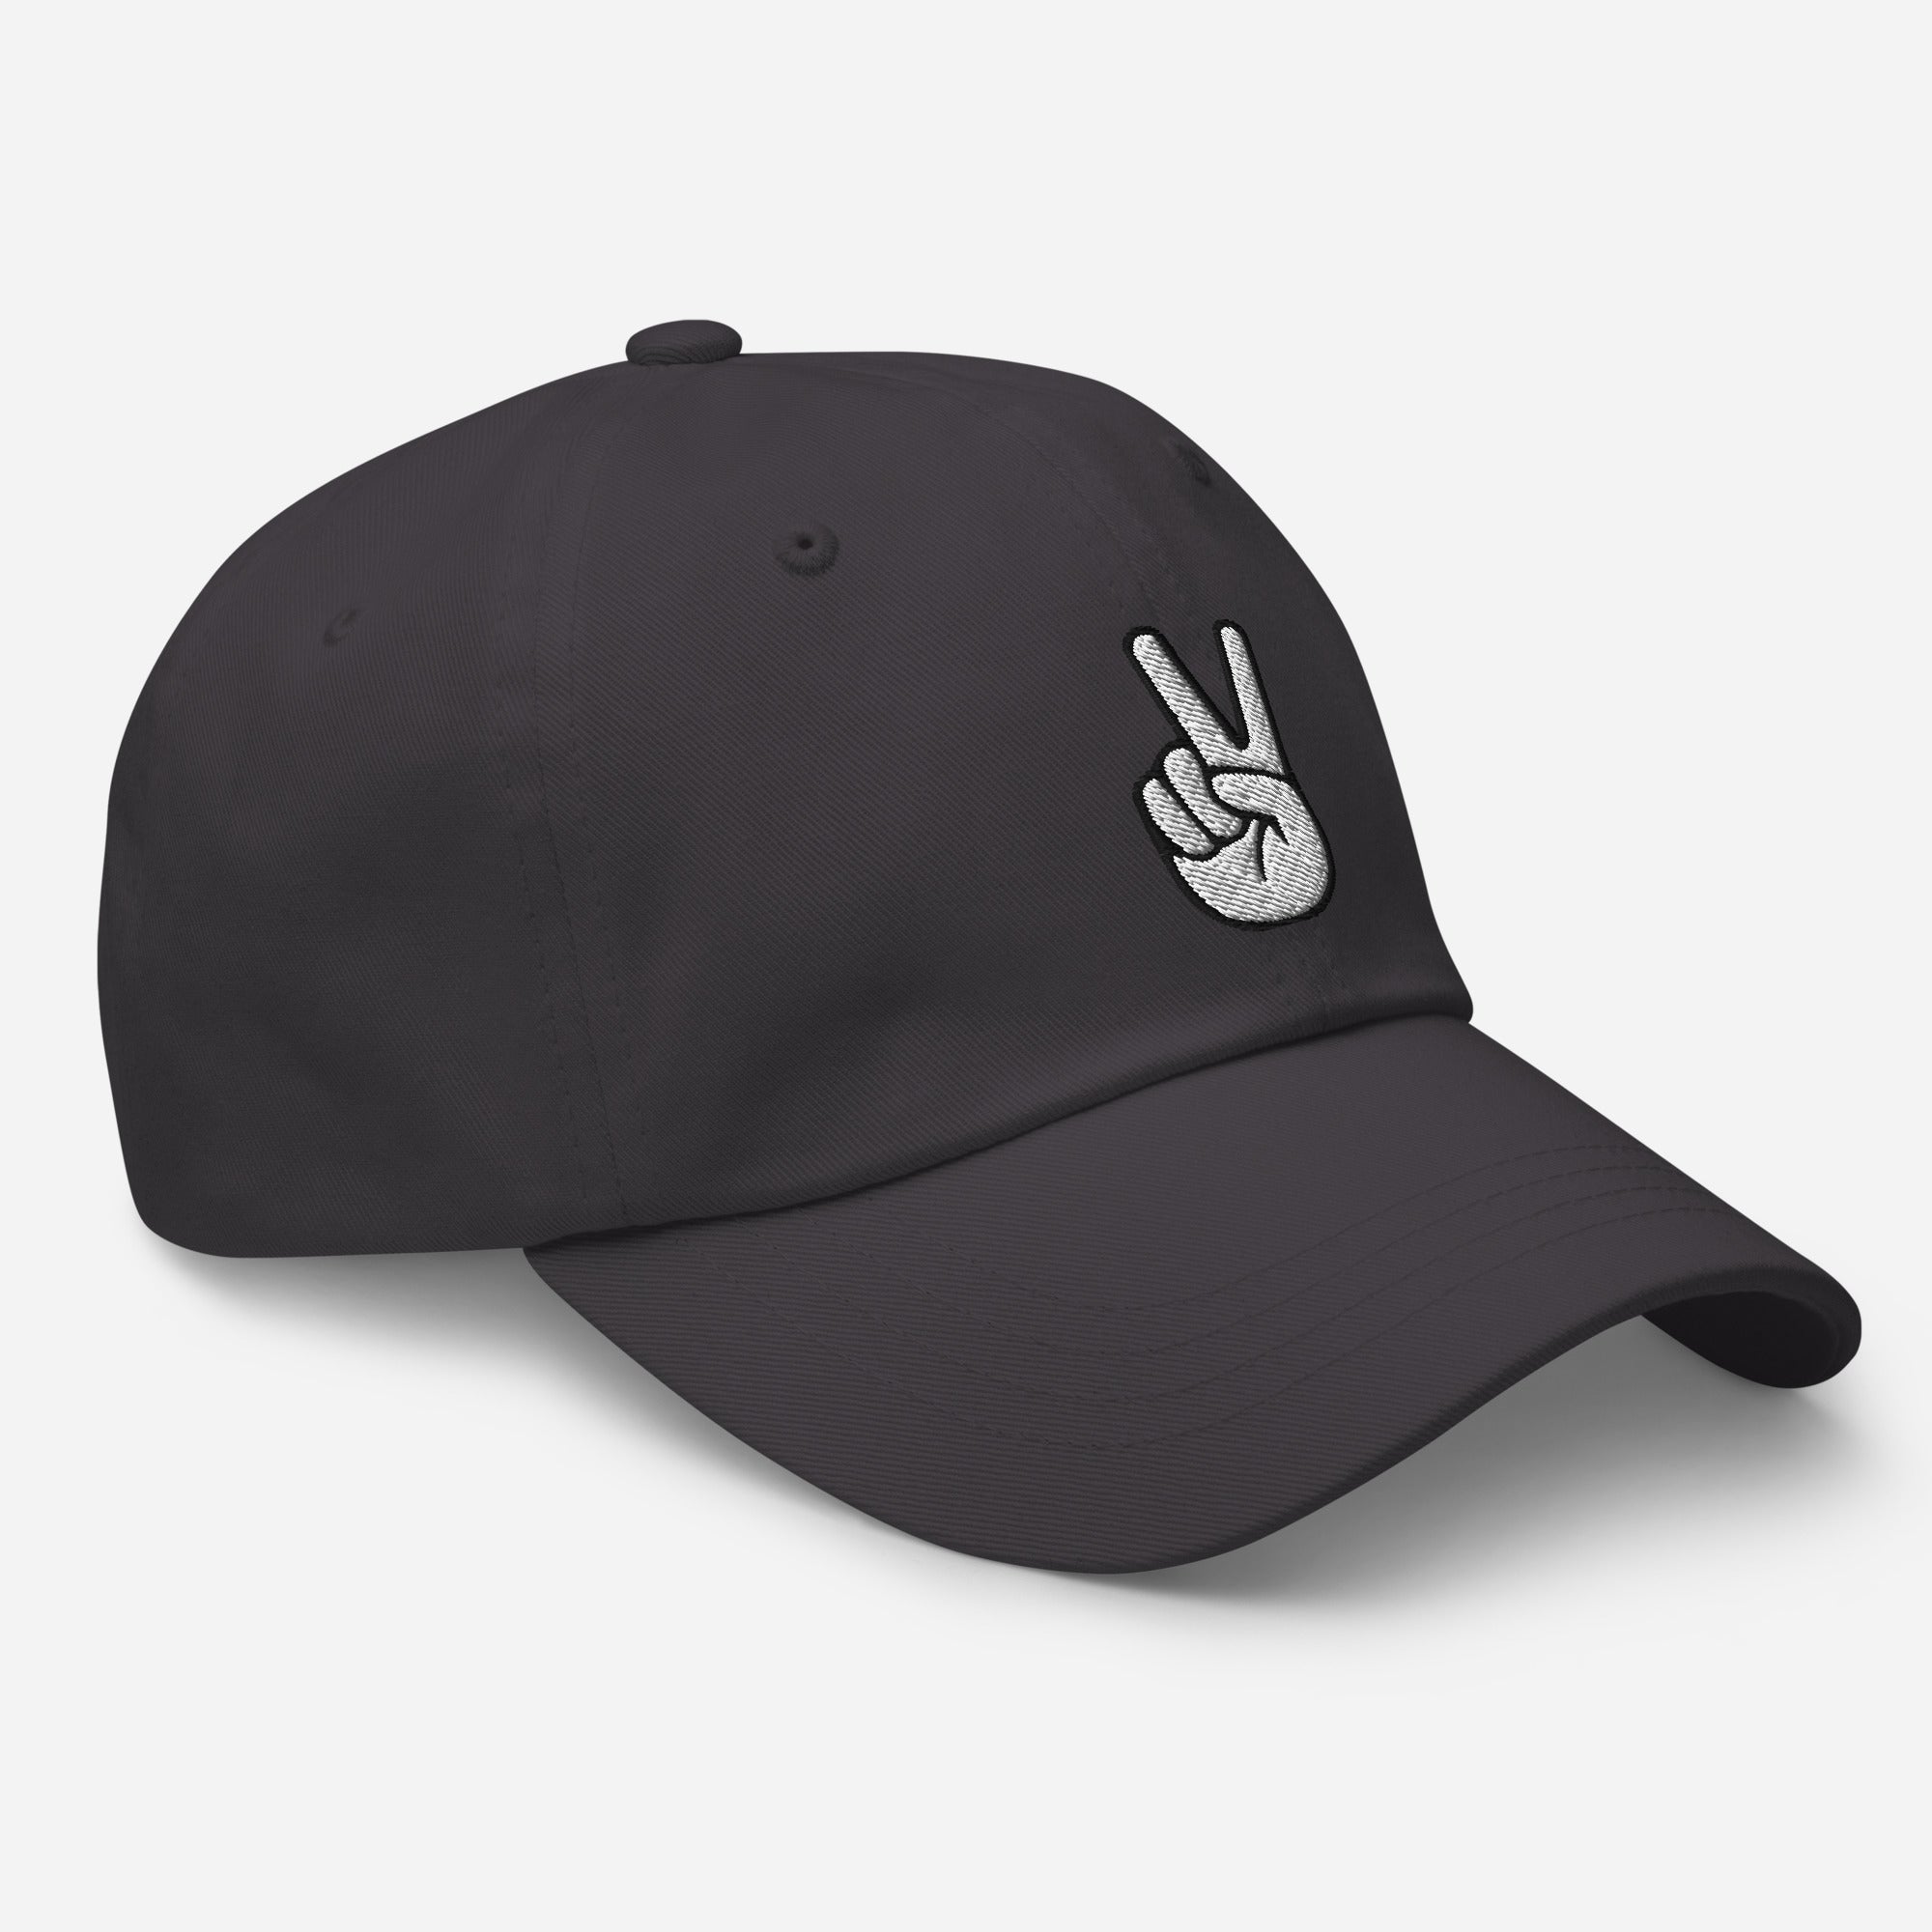 The V Sign for Victory Hand Gesture Embroidered Baseball Cap Dad Hat